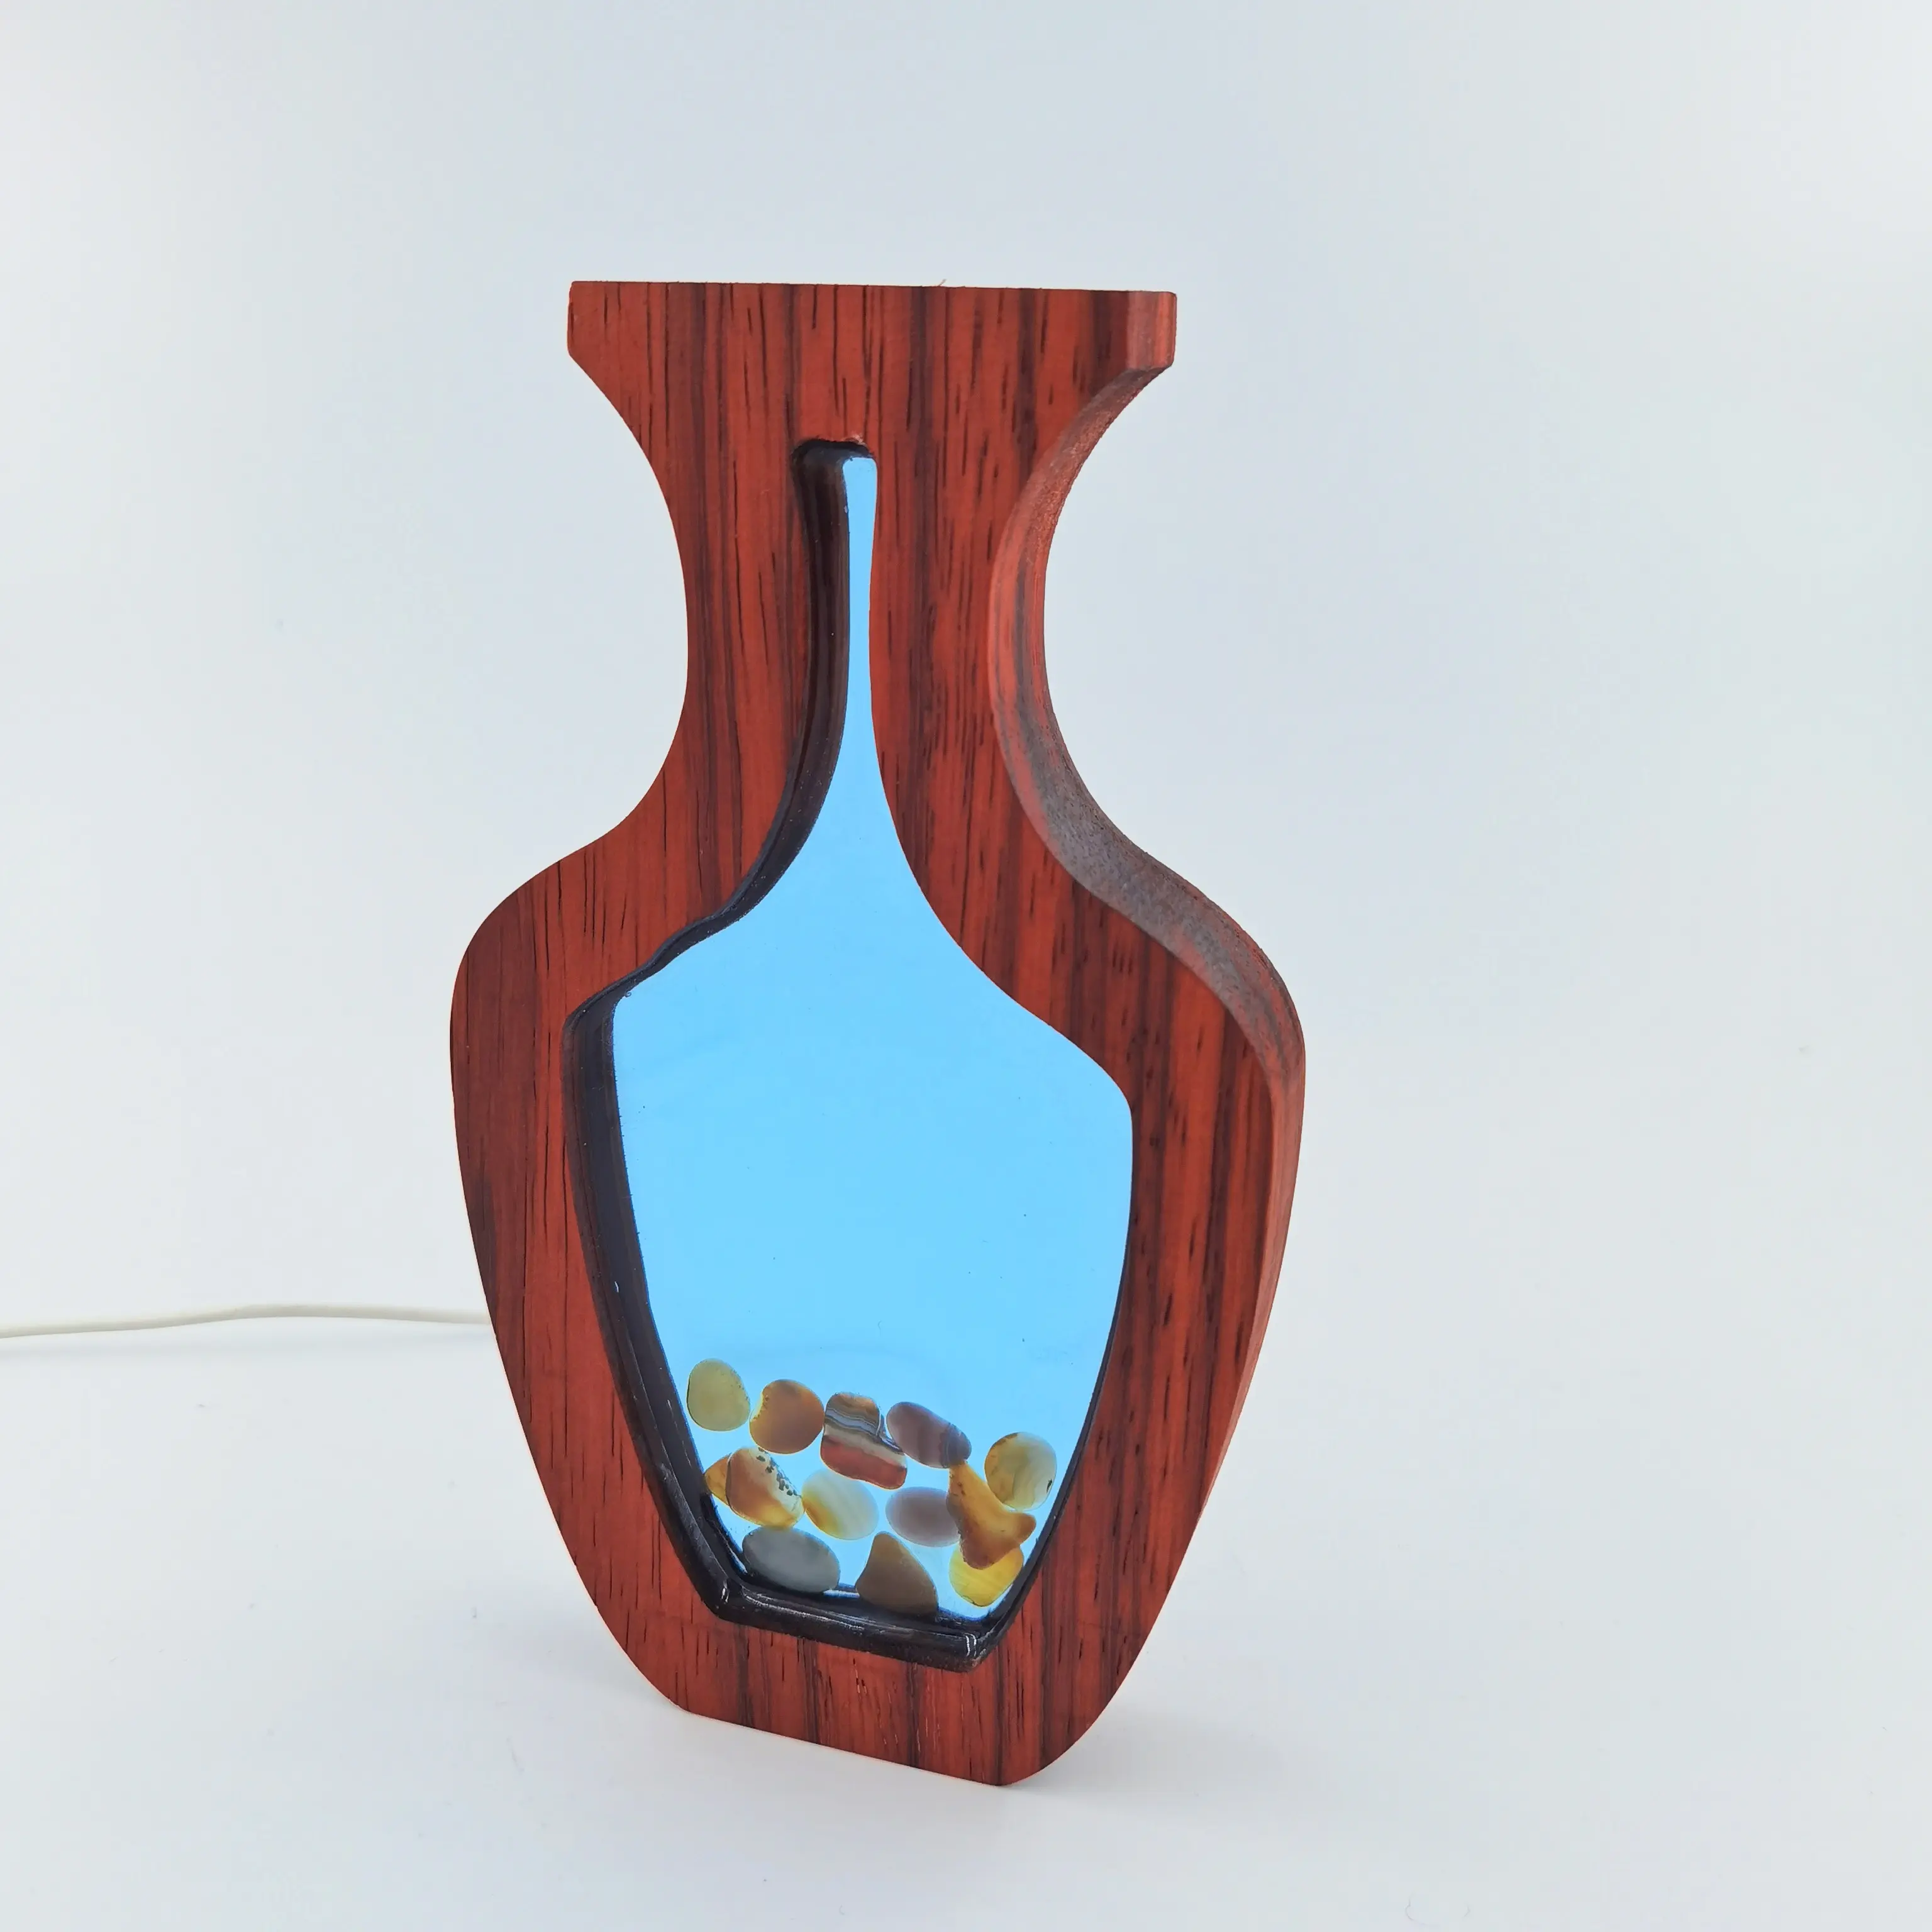 2022 New Arrival Decorative Wooden Table Lamp Epoxy Resin Wood Lamp Modern Luxury Wood Resin Lamp